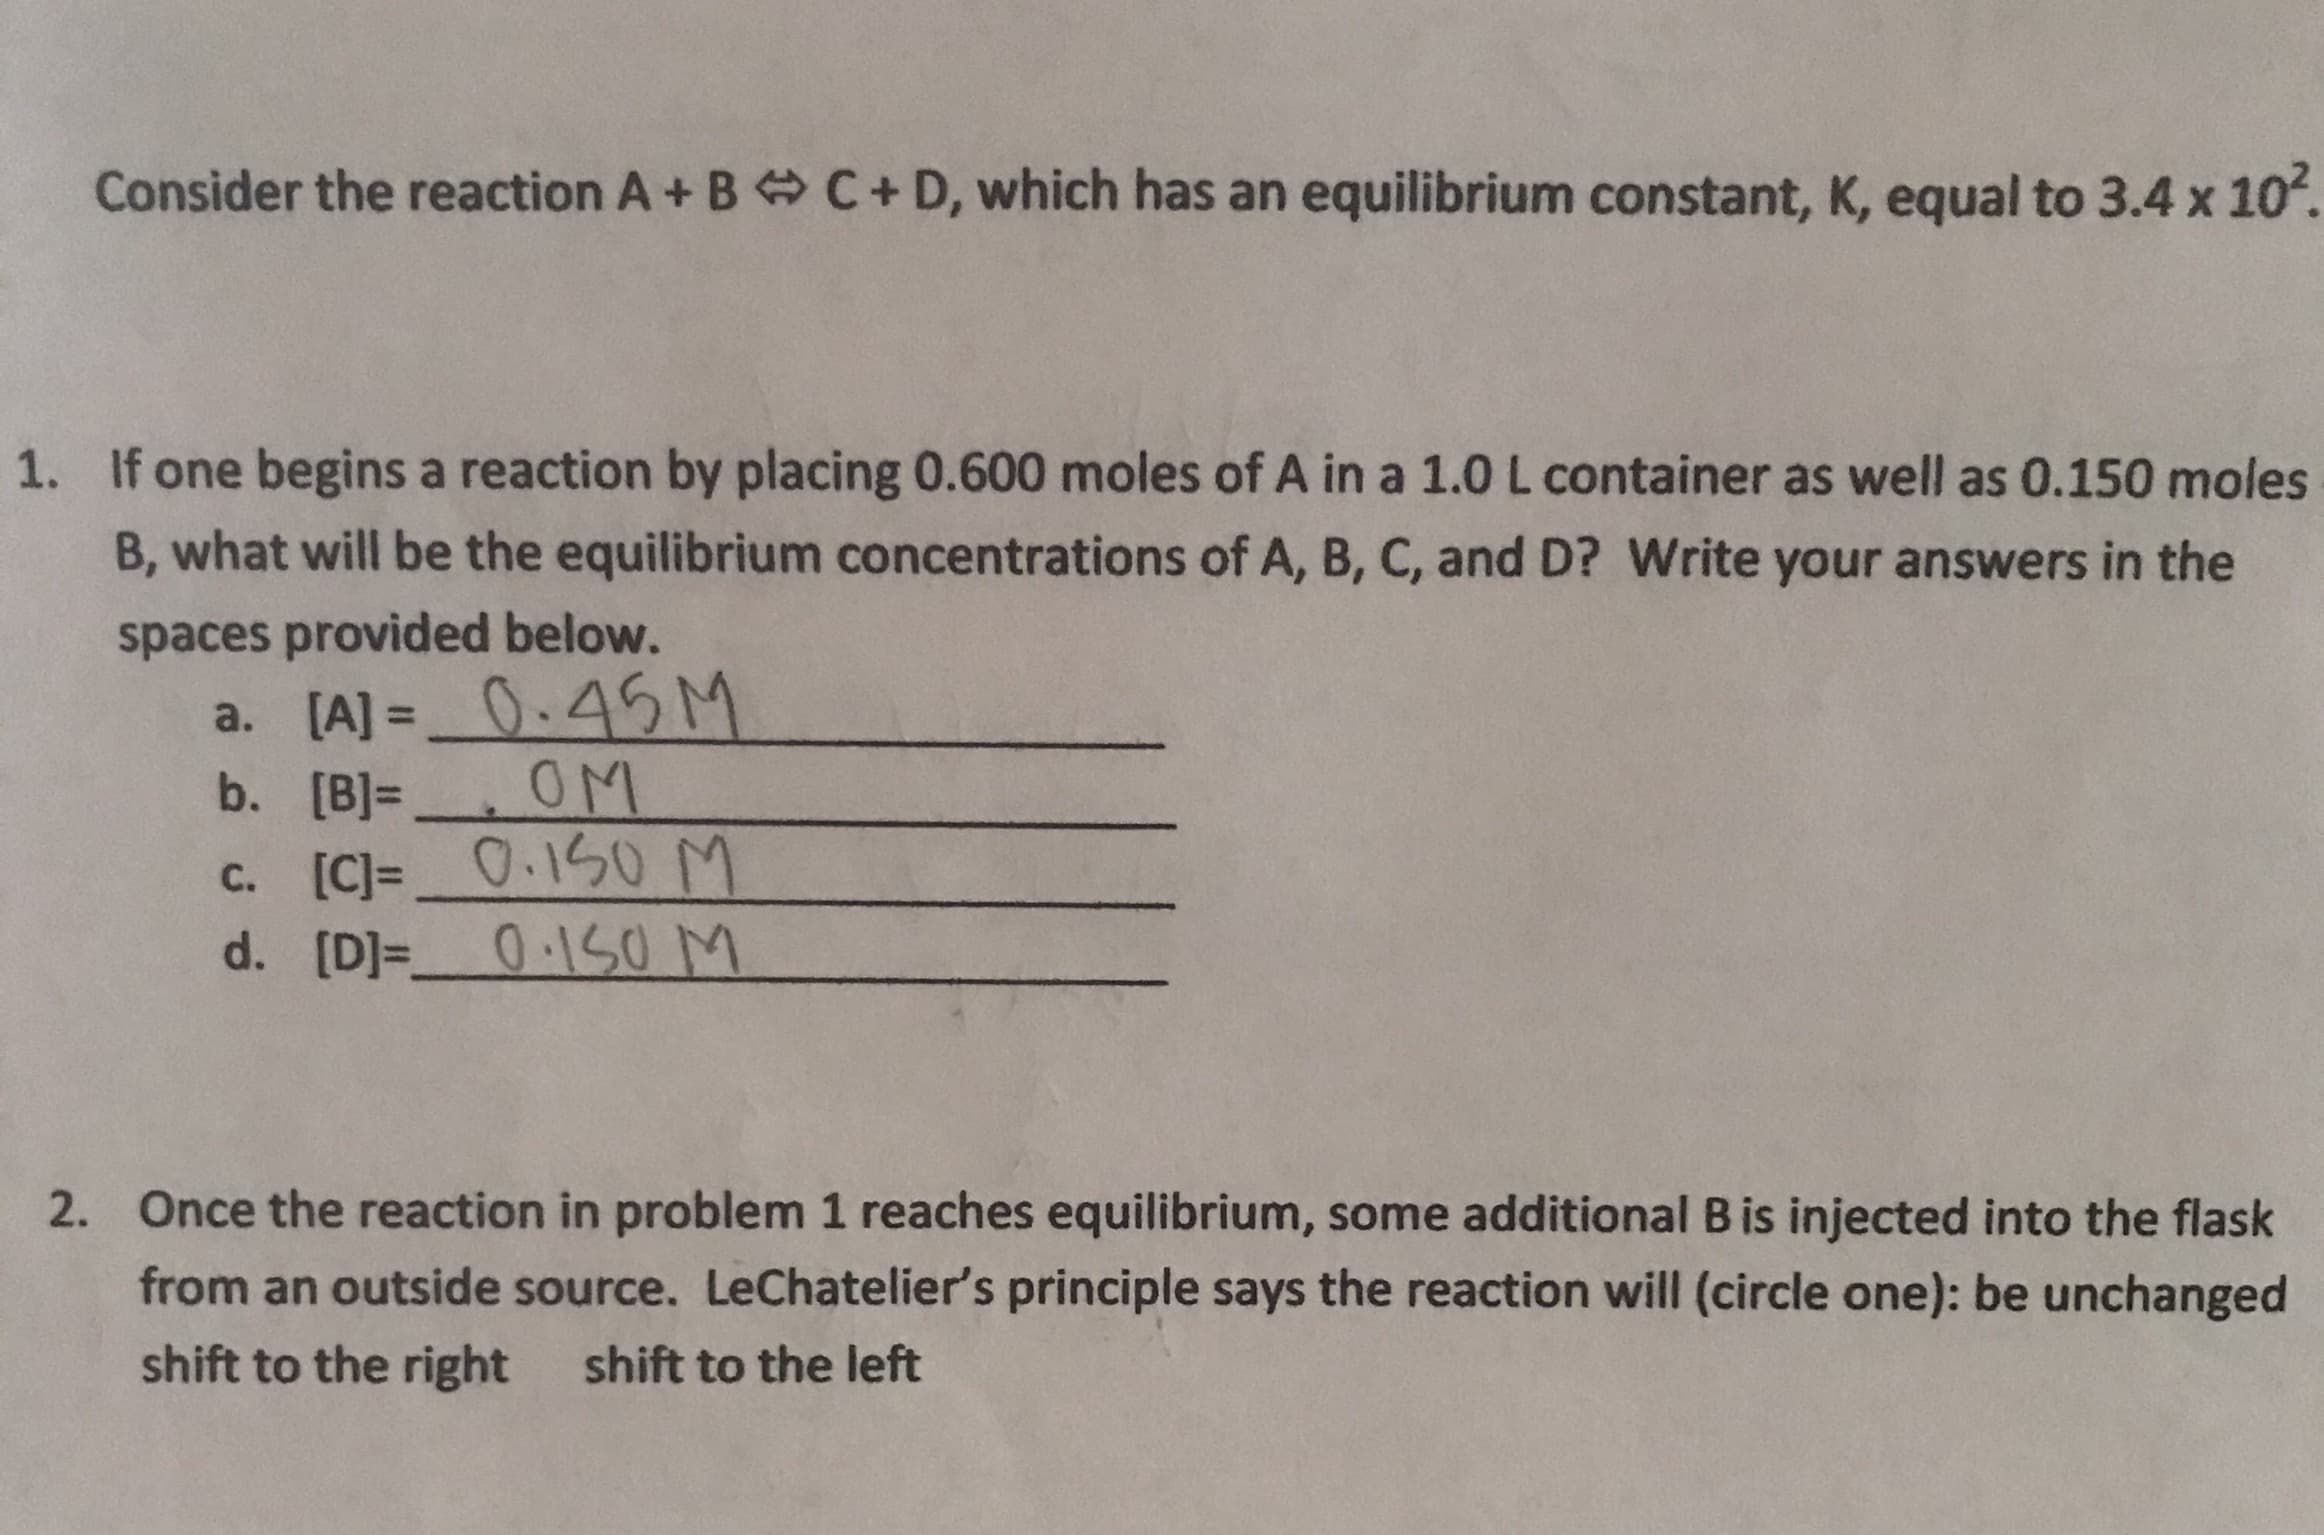 Consider the reaction A+ B C+ D, which has an equilibrium constant, K, equal to 3.4 x 102.
If one begins a reaction by placing 0.600 moles of A in a 1.0 L container as well as 0.150 moles
1.
B, what will be the equilibrium concentrations of A, B, C, and D? Write your answers in the
spaces provided below.
[A] 0.45M
[B) OM
[C]=0.150 M
0-150 M
a.
b.
С.
d. [D]-_
Once the reaction in problem 1 reaches equilibrium, some additional B is injected into the flask
2.
from an outside source. LeChatelier's principle says the reaction will (circle one): be unchanged
shift to the right
shift to the left
